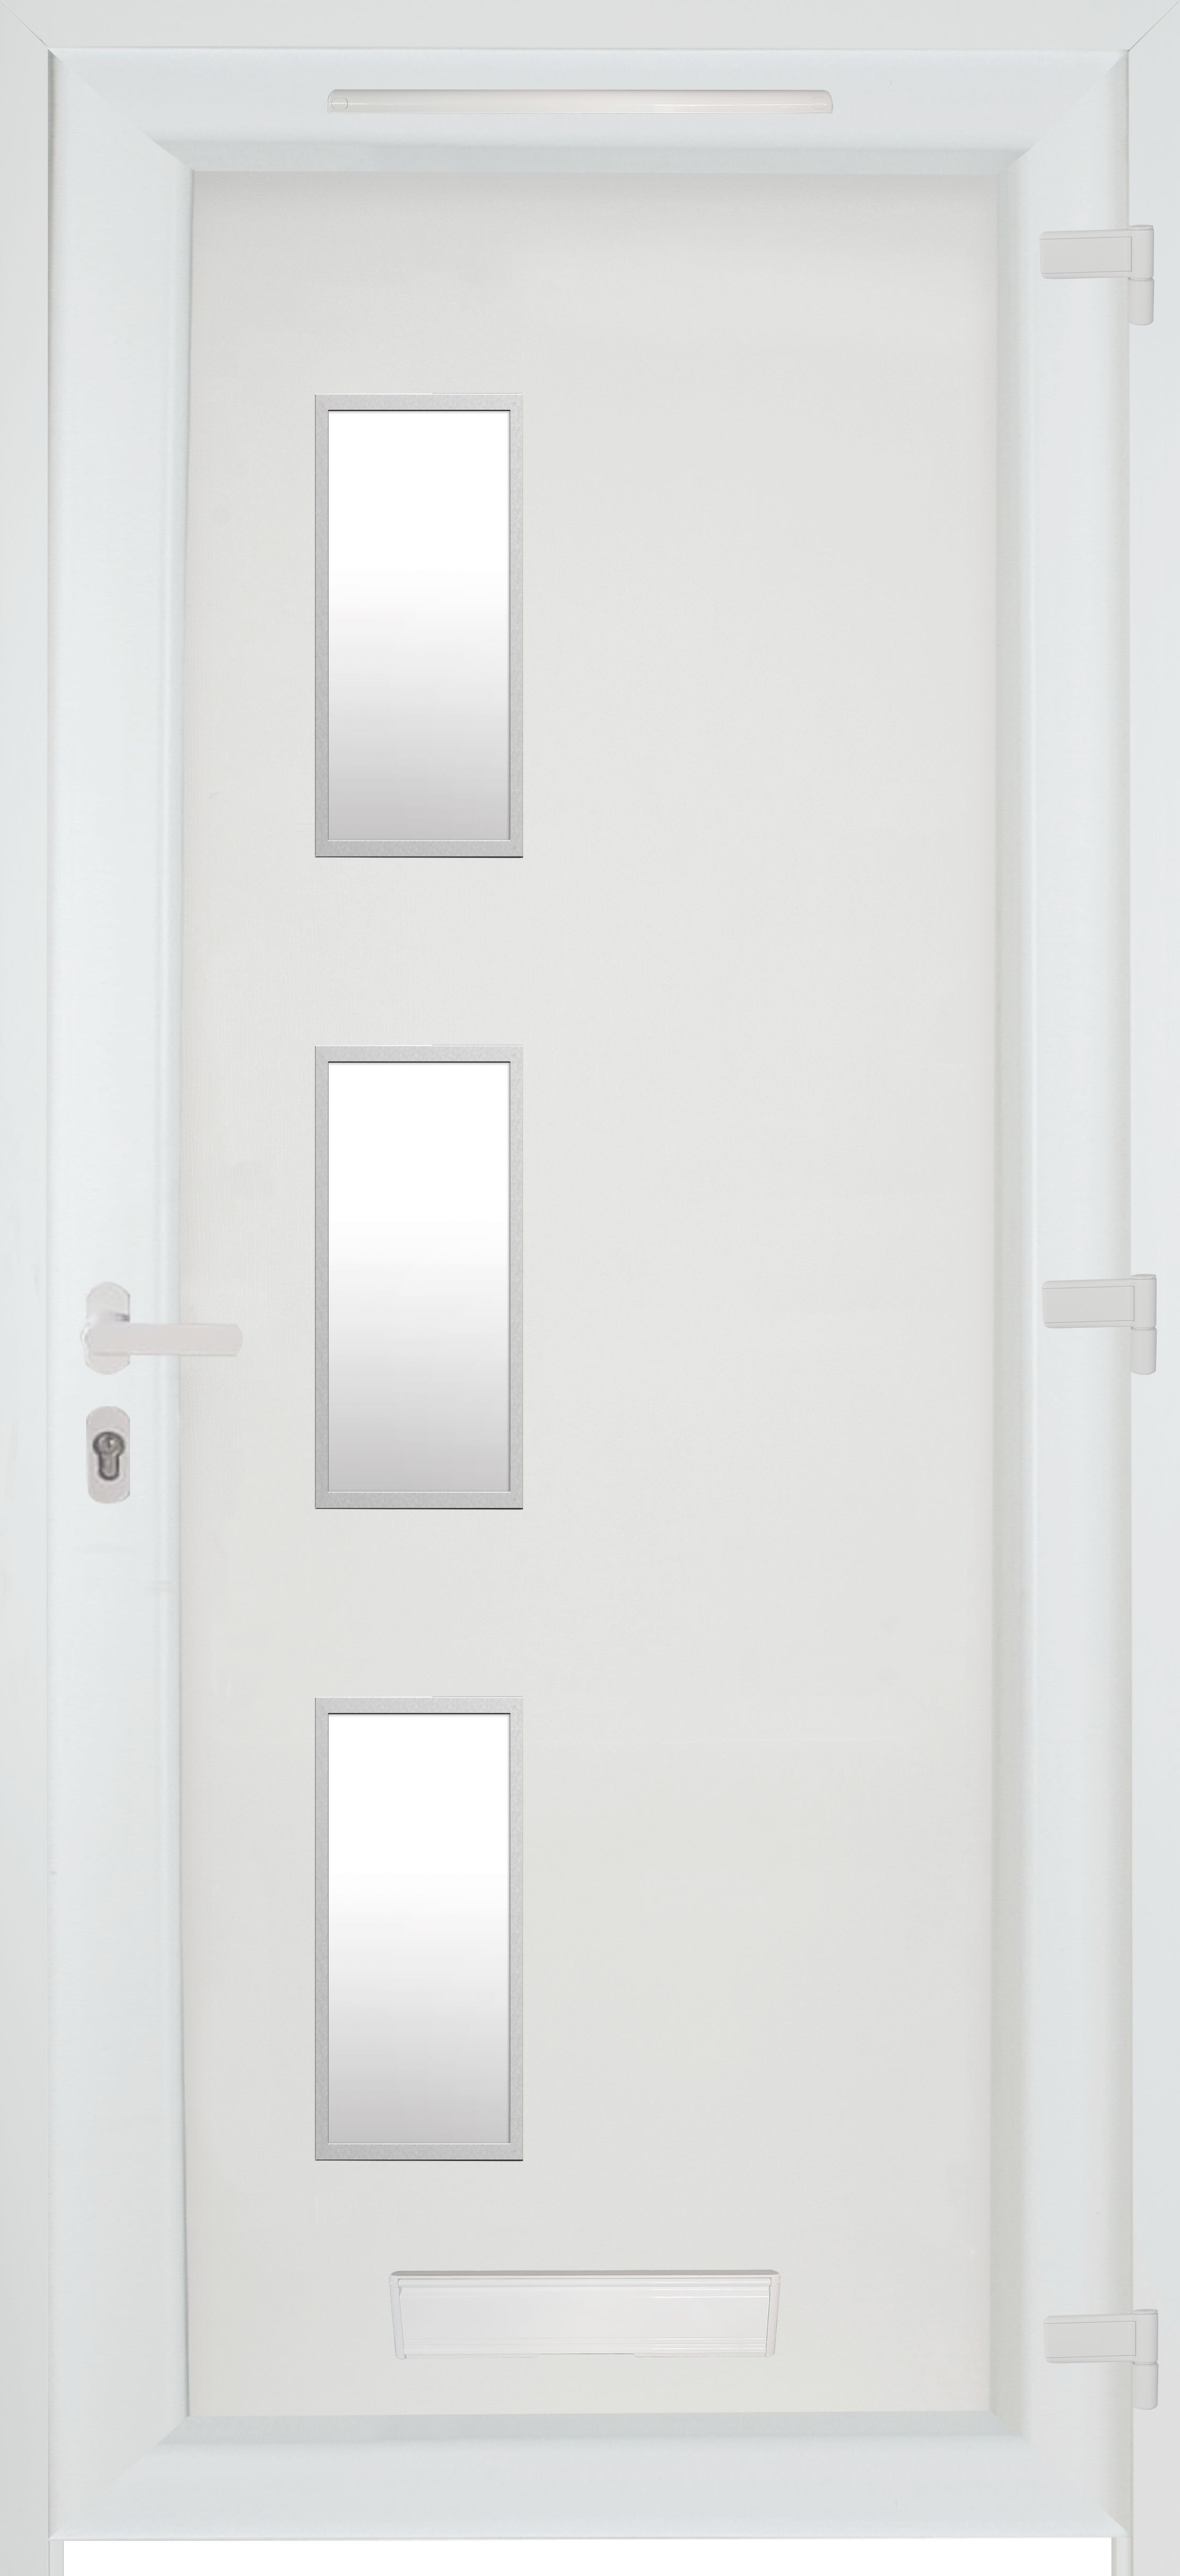 Fortia Kilifi Frosted Glazed Antracite LH External Front Door set, (H)2085mm (W)840mm